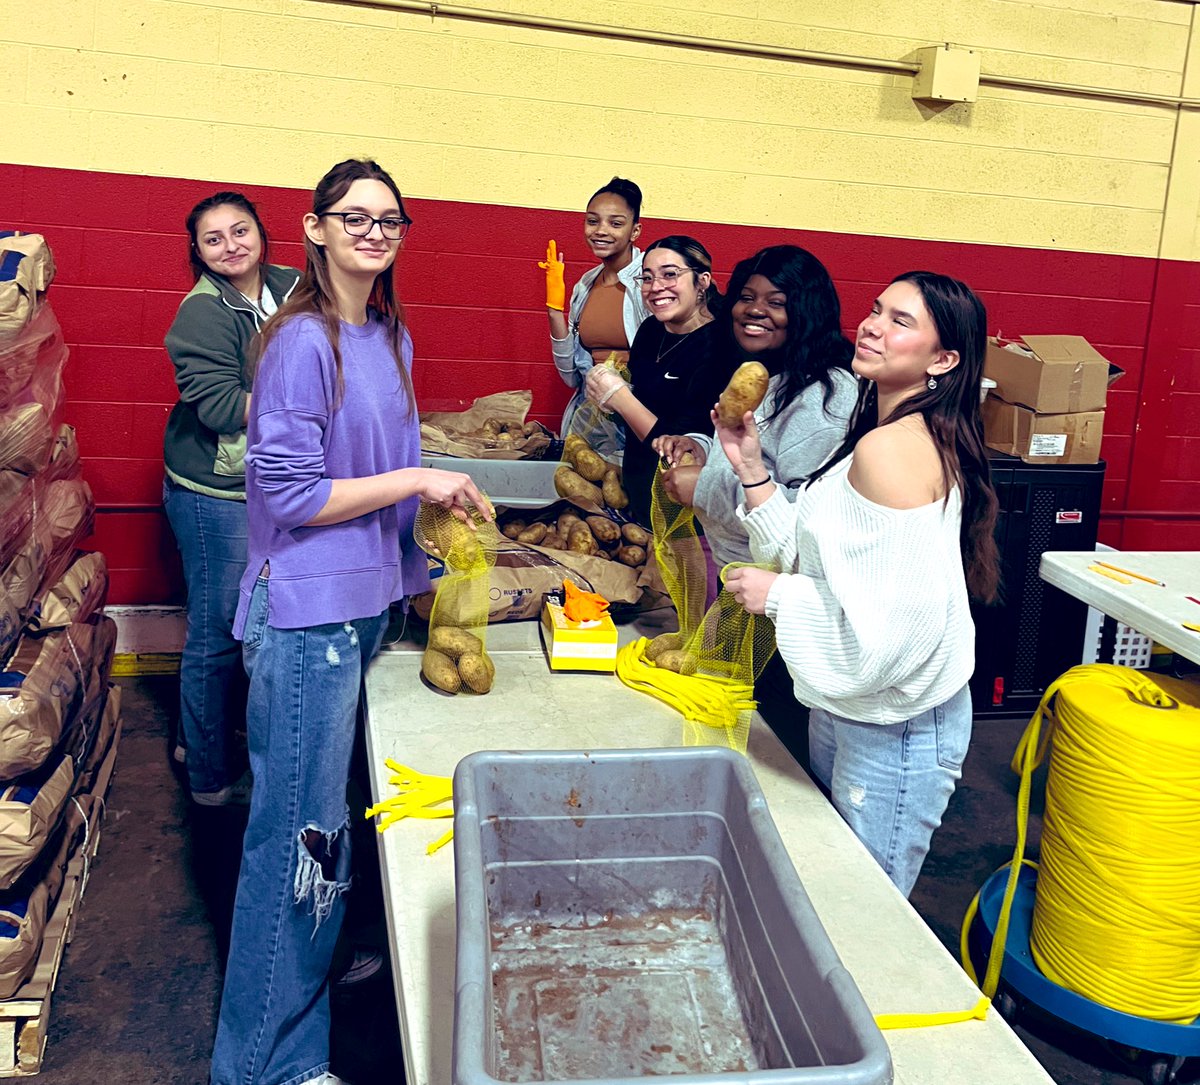 AVID 12 decided to give back for their field trip @HarvestersORG! Time flew by peeling potatoes!🥔We laughed & shared fun stories!I am going to miss this crew! @NorthtownNews @AVID4College 💛💜🐝